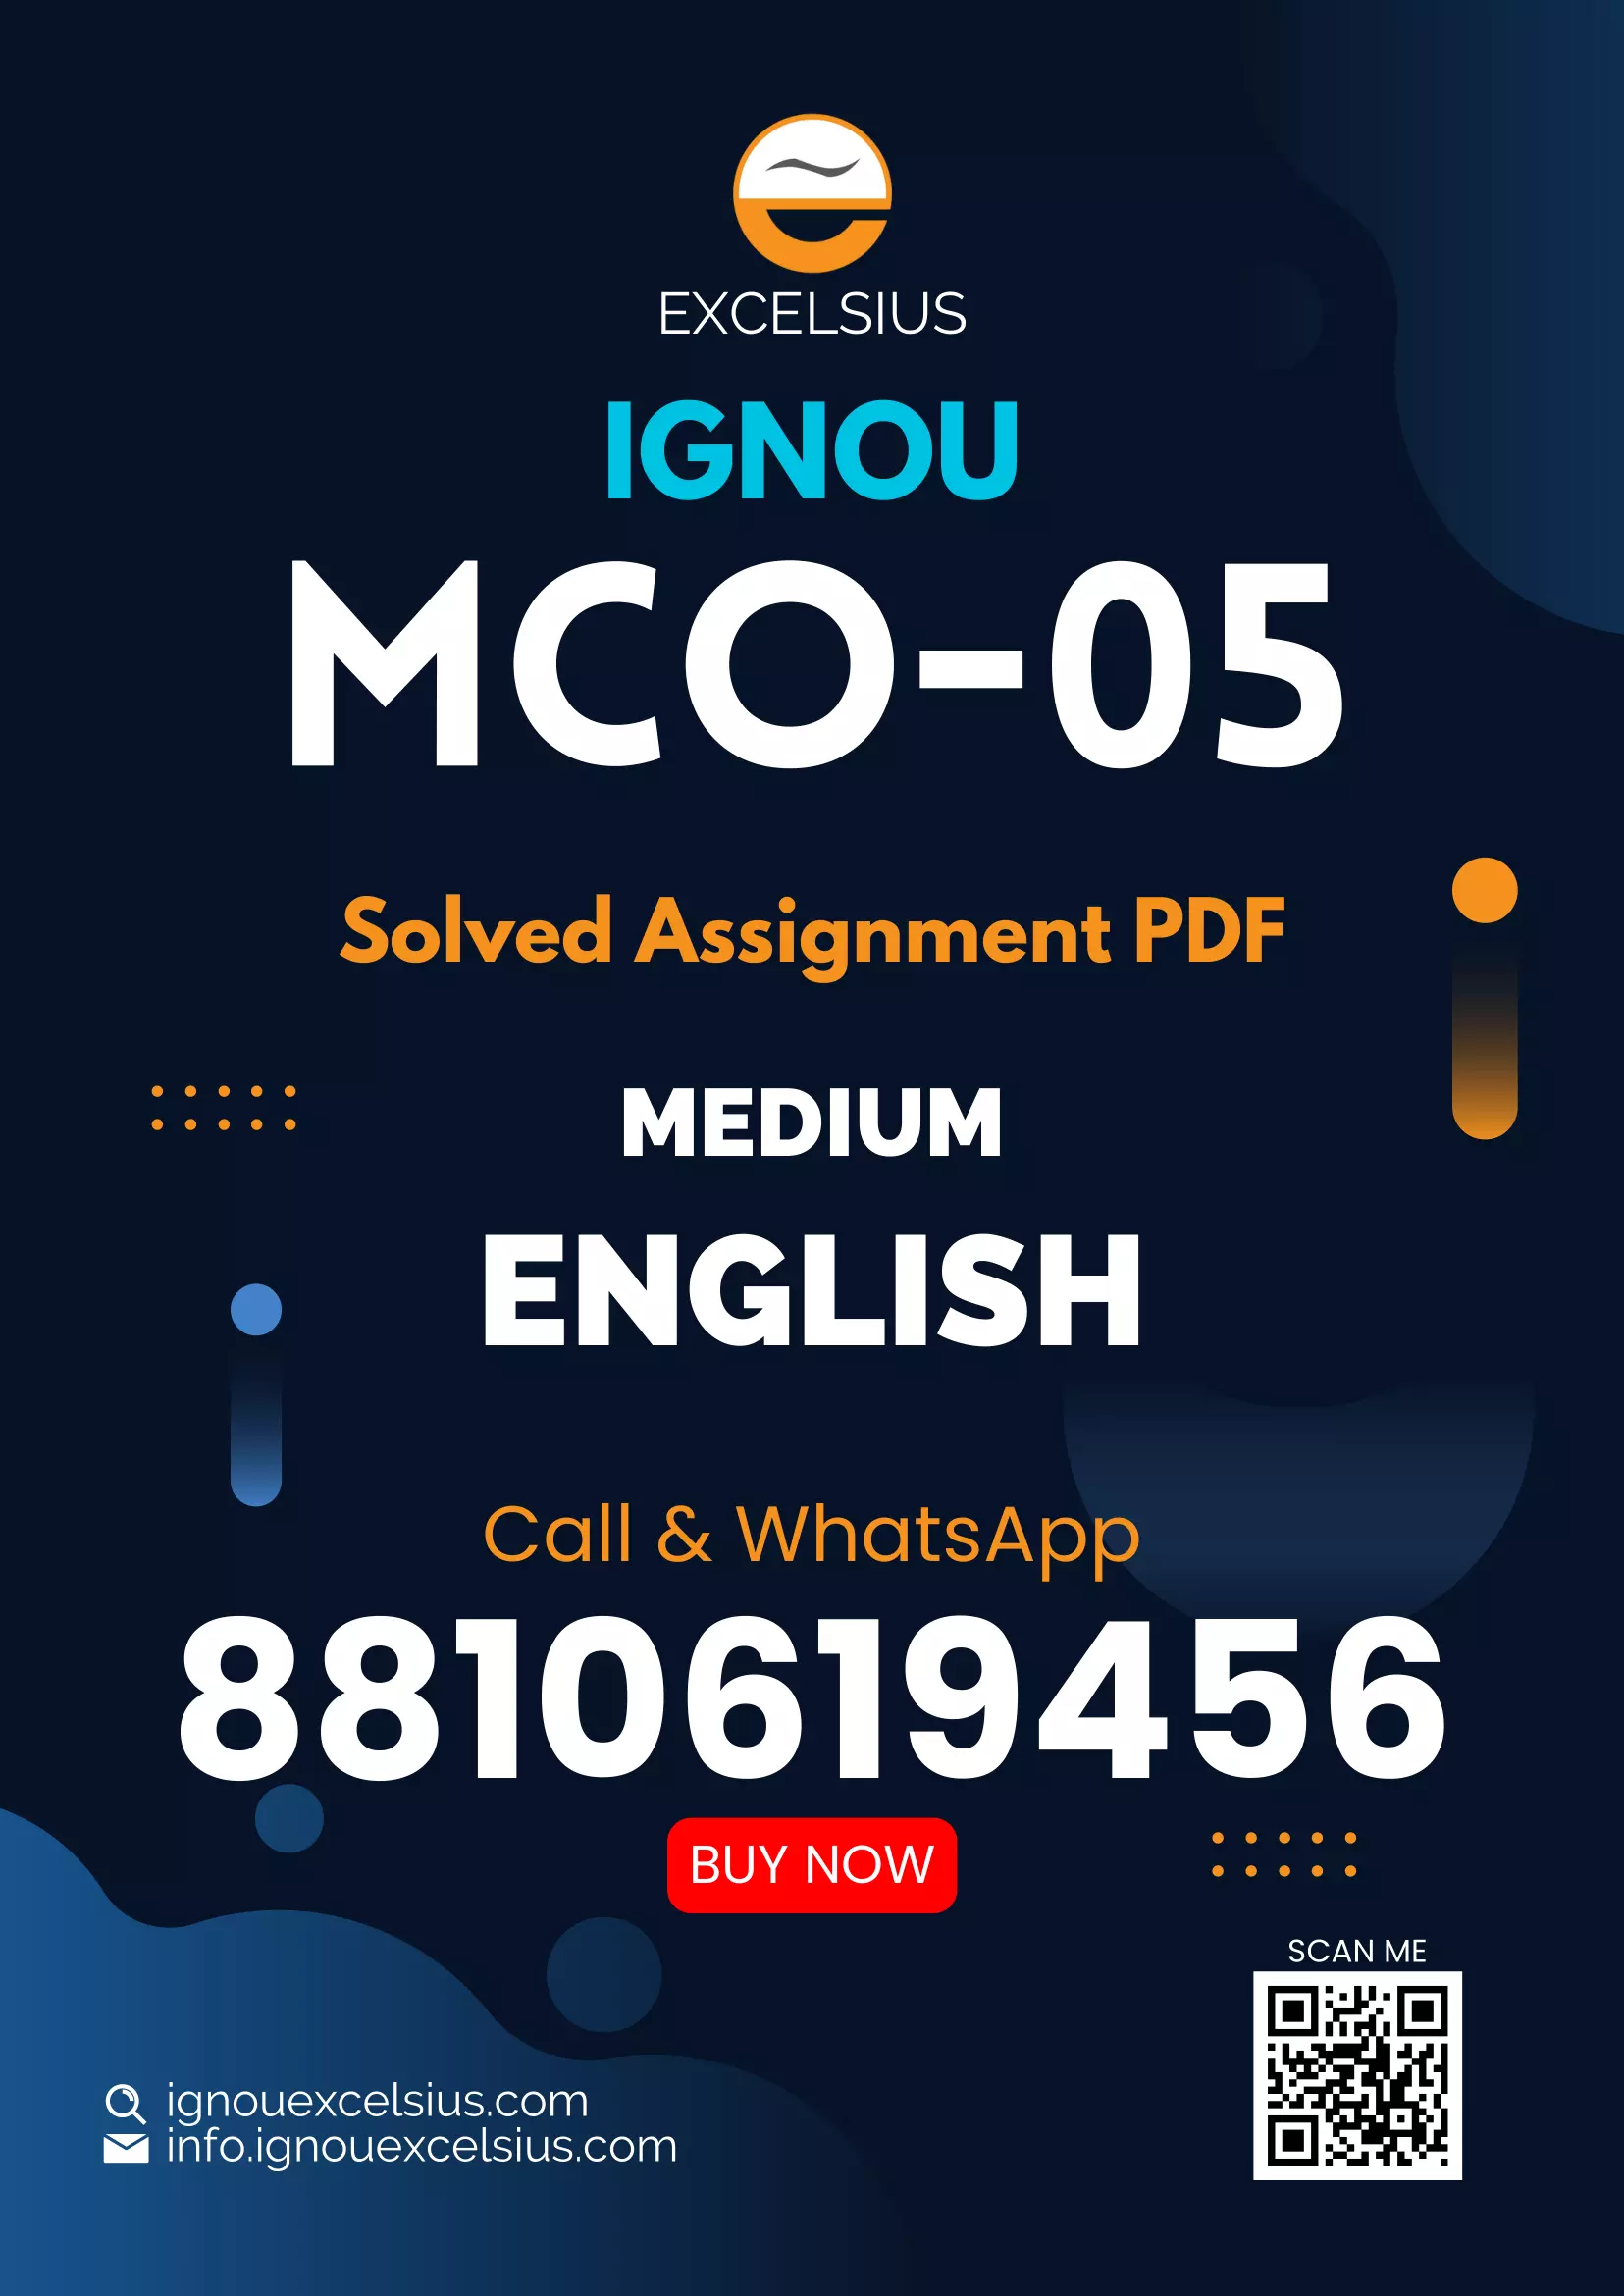 IGNOU MCO-05 - Accounting for Managerial Decisions, Latest Solved Assignment-July 2022 – January 2023